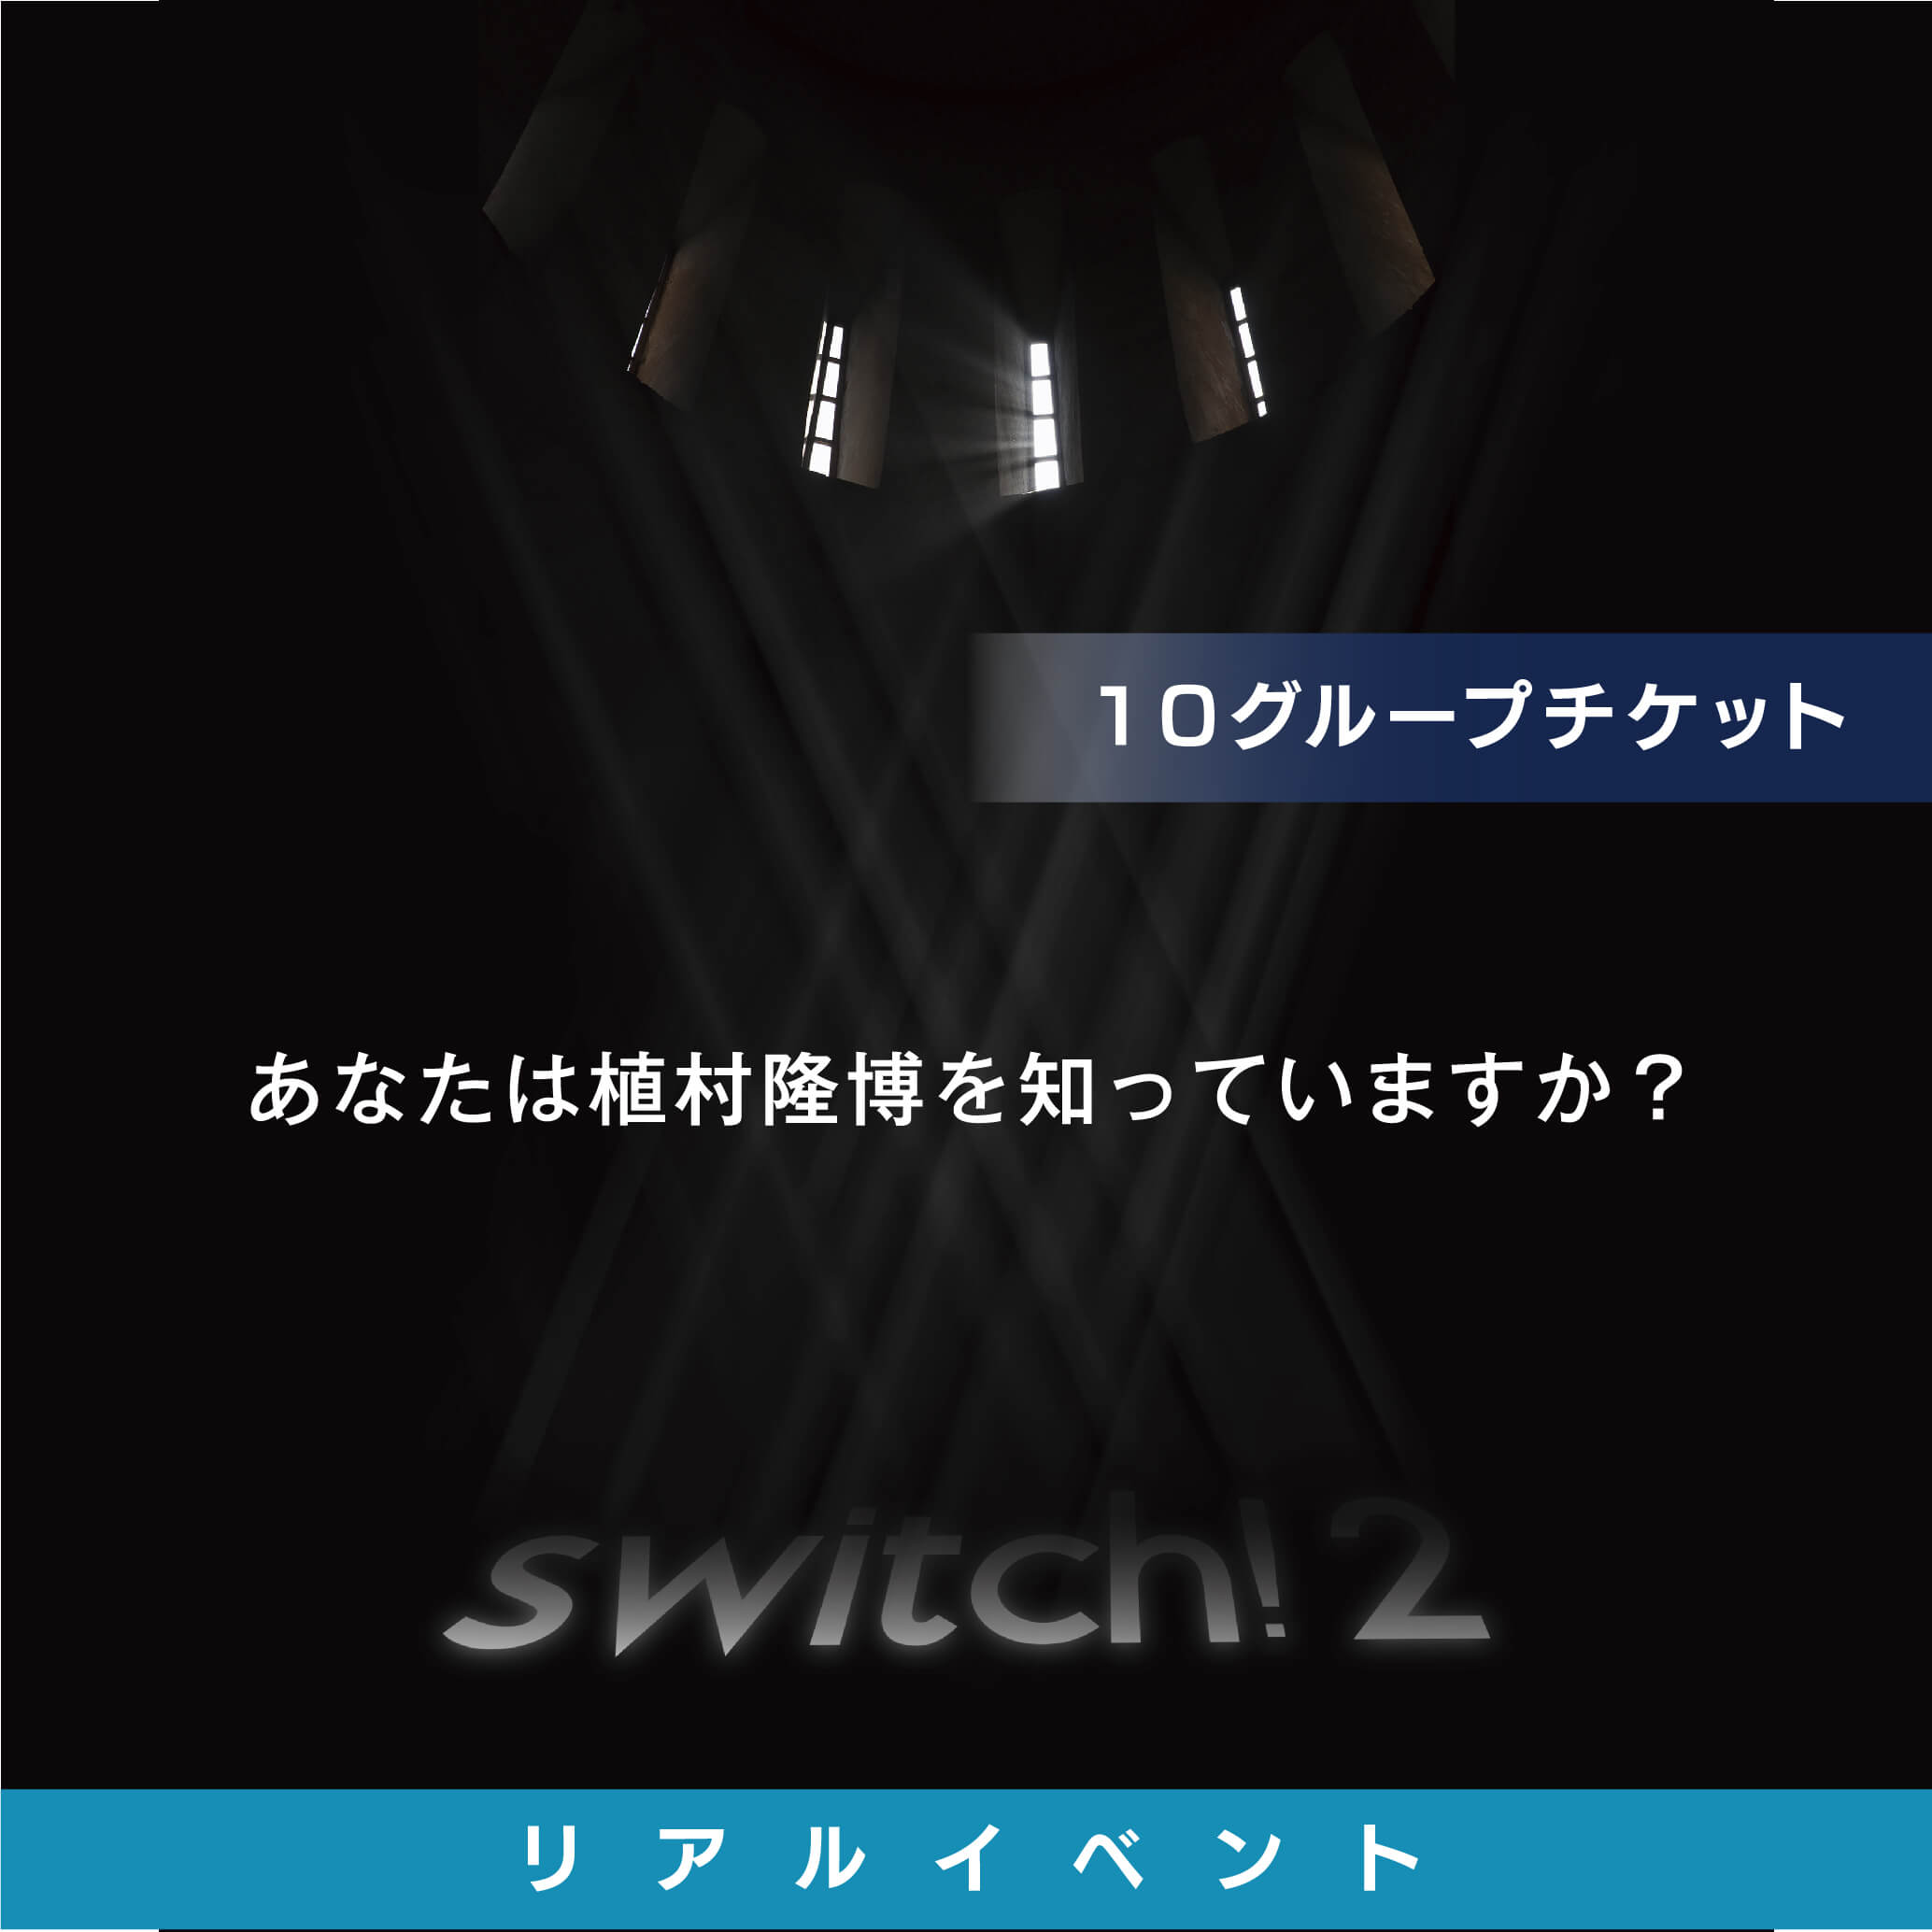 Switch!2 [10 Group tickets] | G SELECT ガモウの理美容用品通販サイト